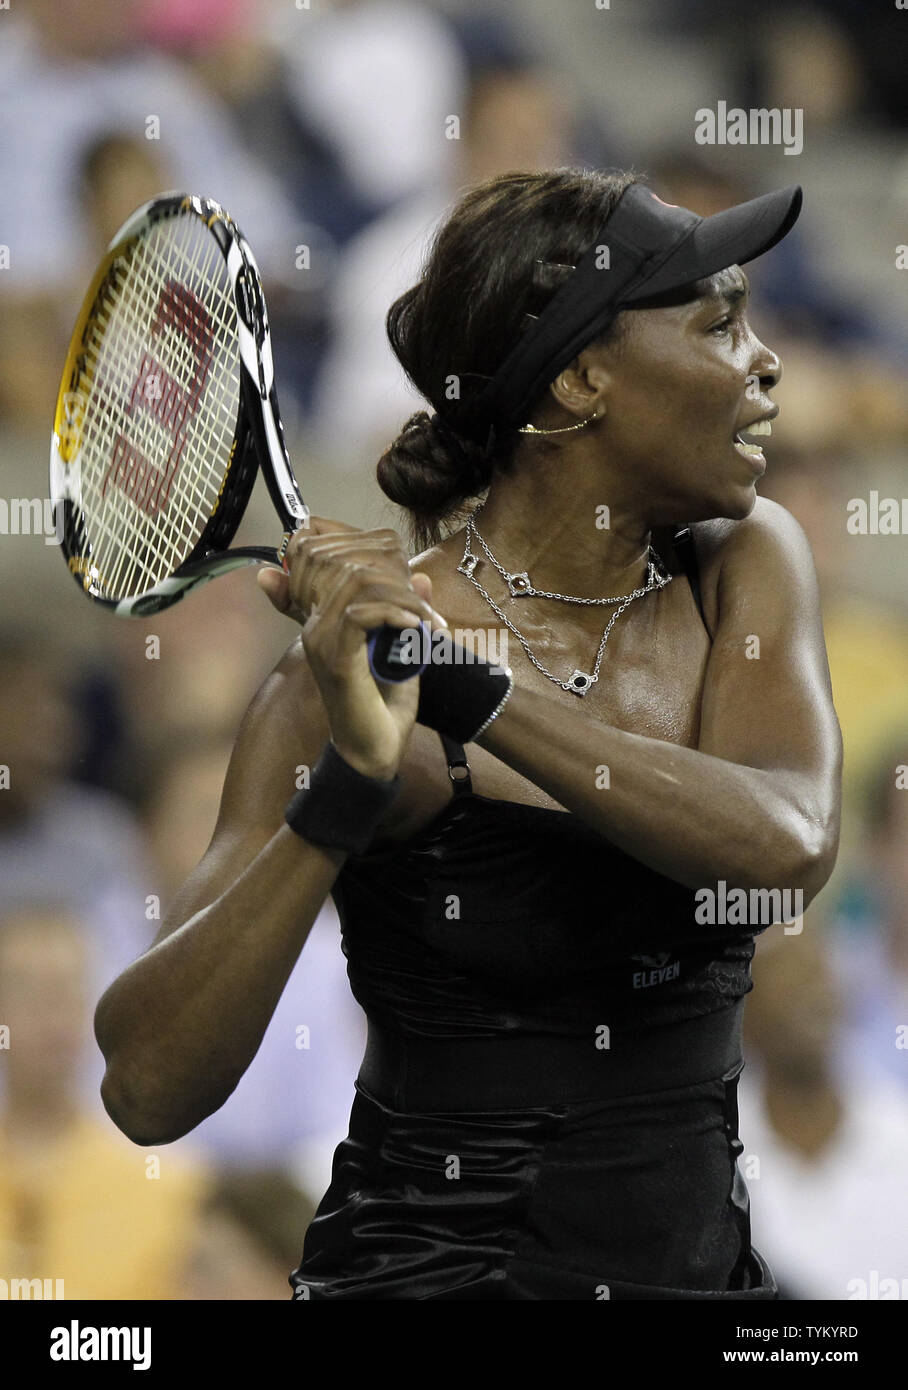 Venus Williams of the USA hits a backhand to Roberta Vinci of Italy in the first round of the U.S. Open Tennis Championships in Arthur Ashe Stadium in New York City on August 30, 2010.         UPI/John Angelillo Stock Photo